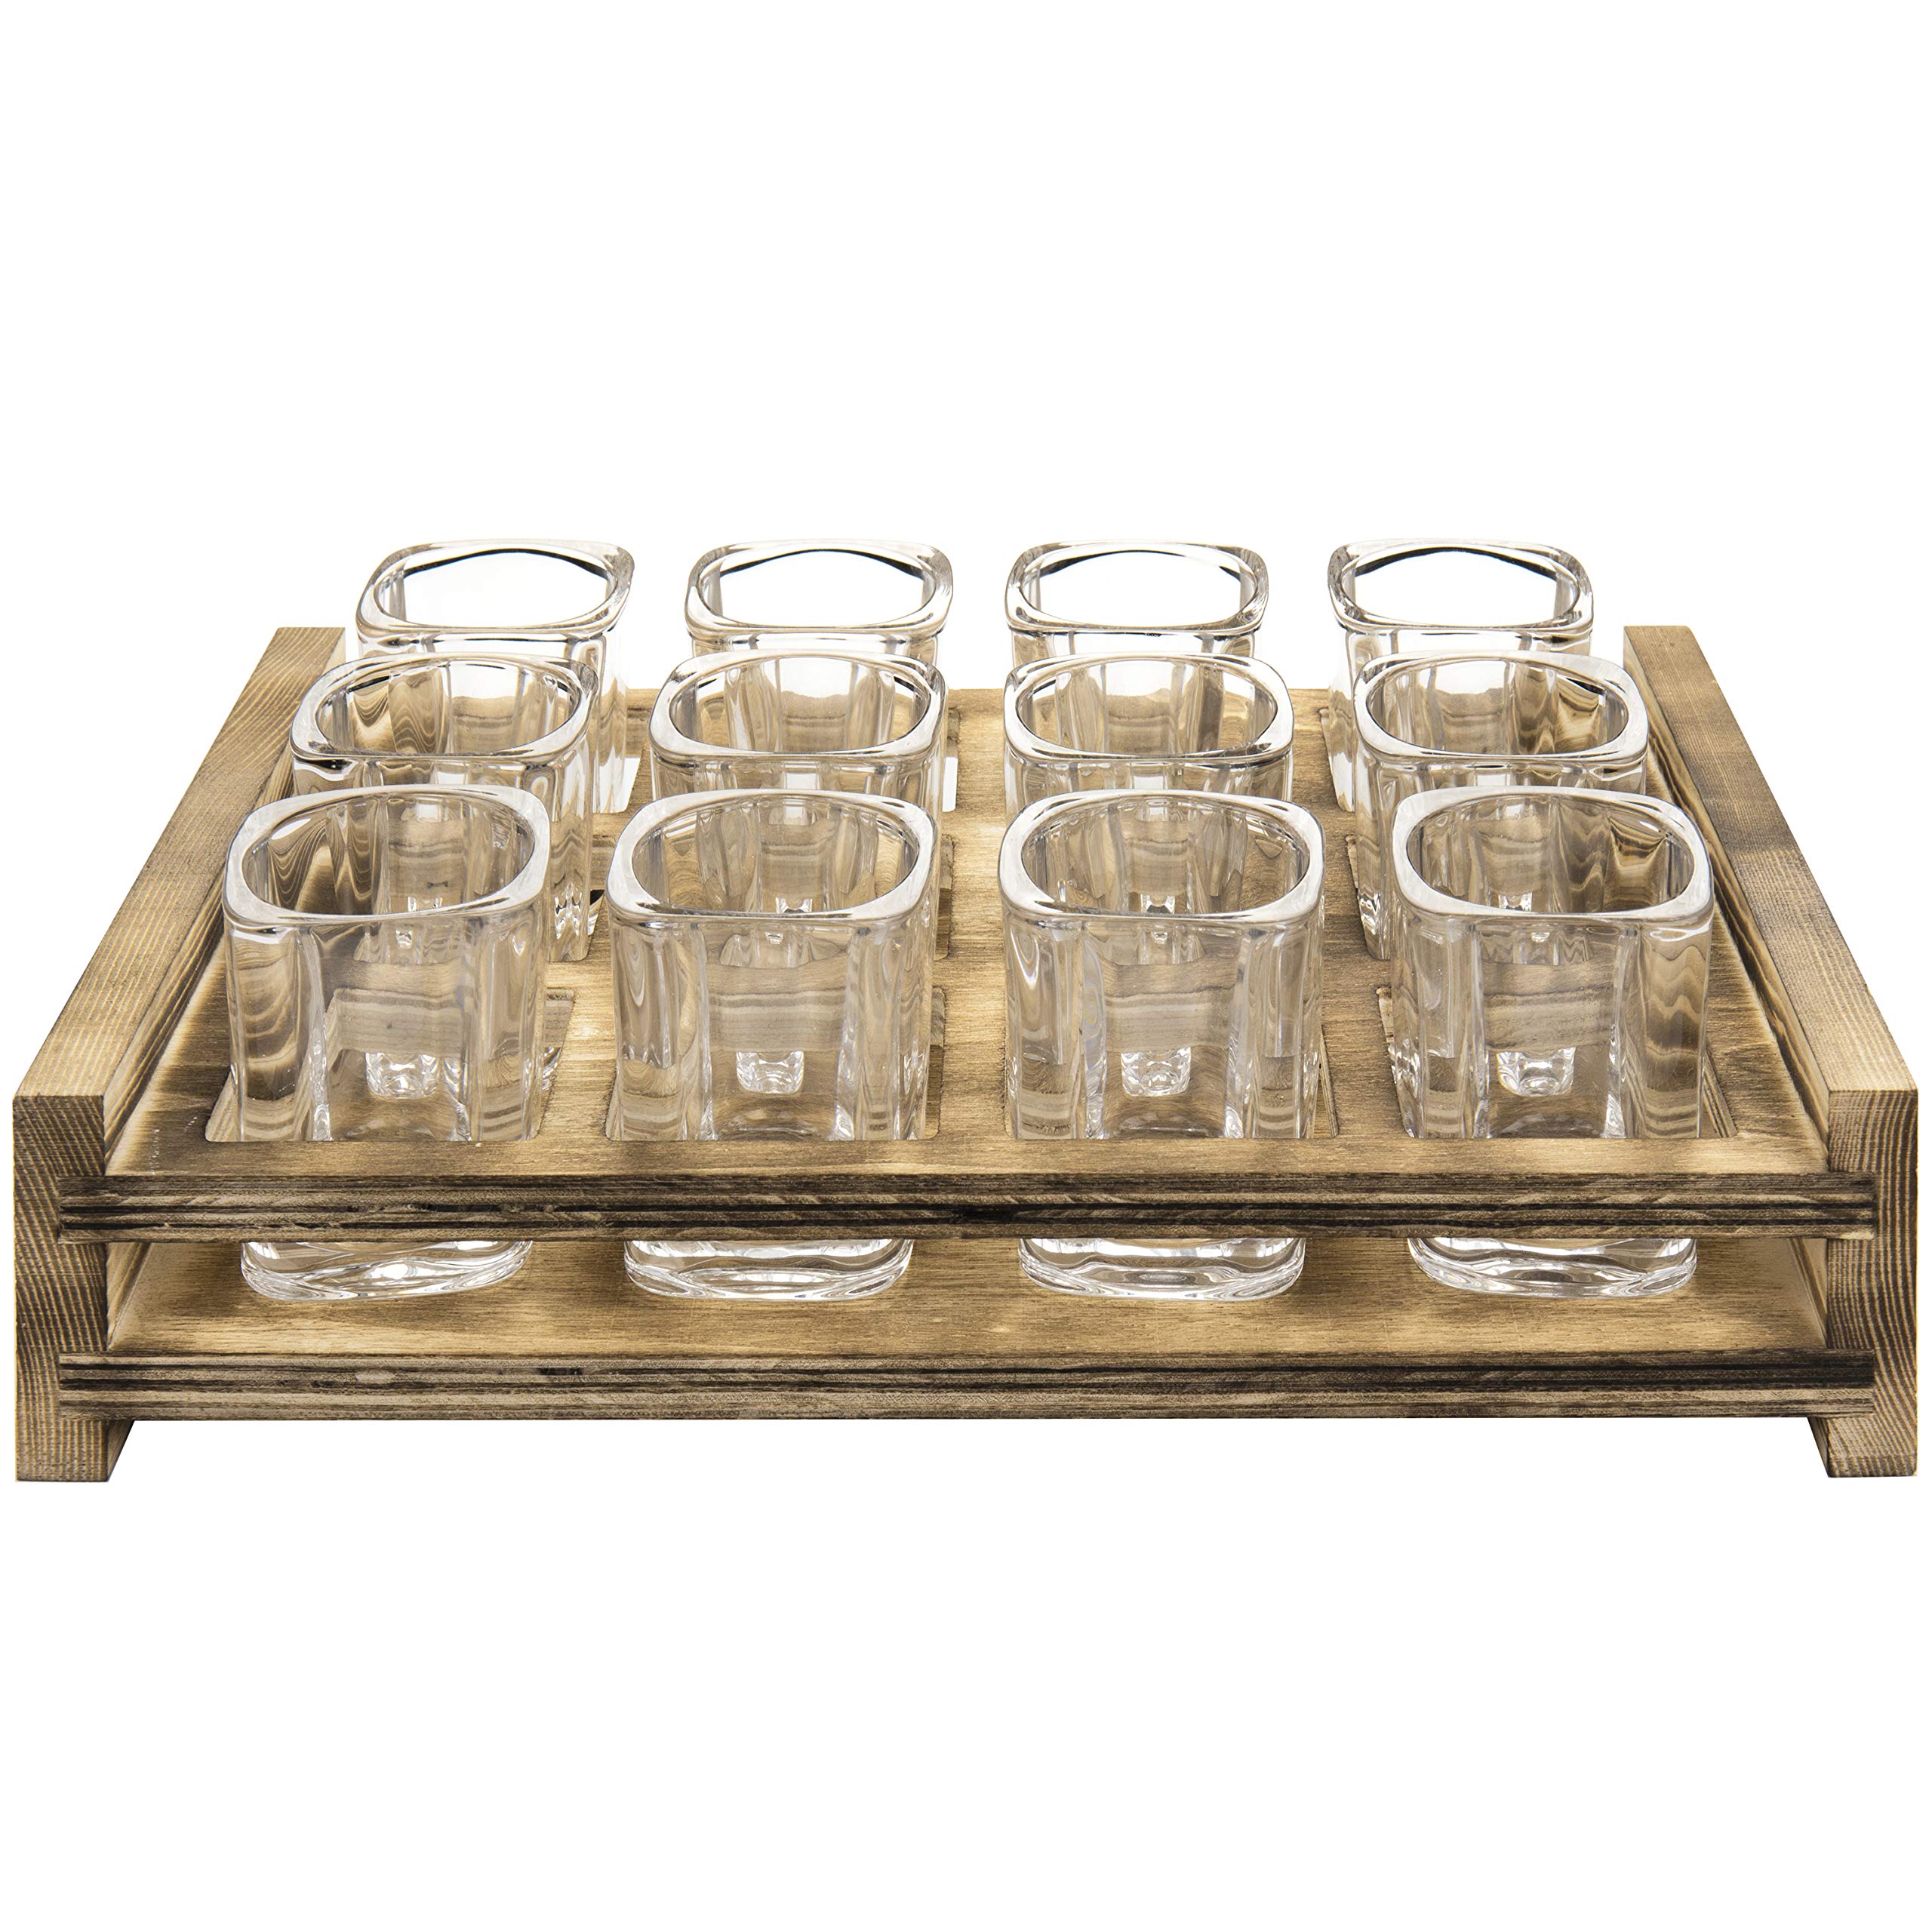 MyGift Shot Glass Serving Set Includes 12 Square Shot Glasses and Burnt Brown Wood Slotted Server Tray